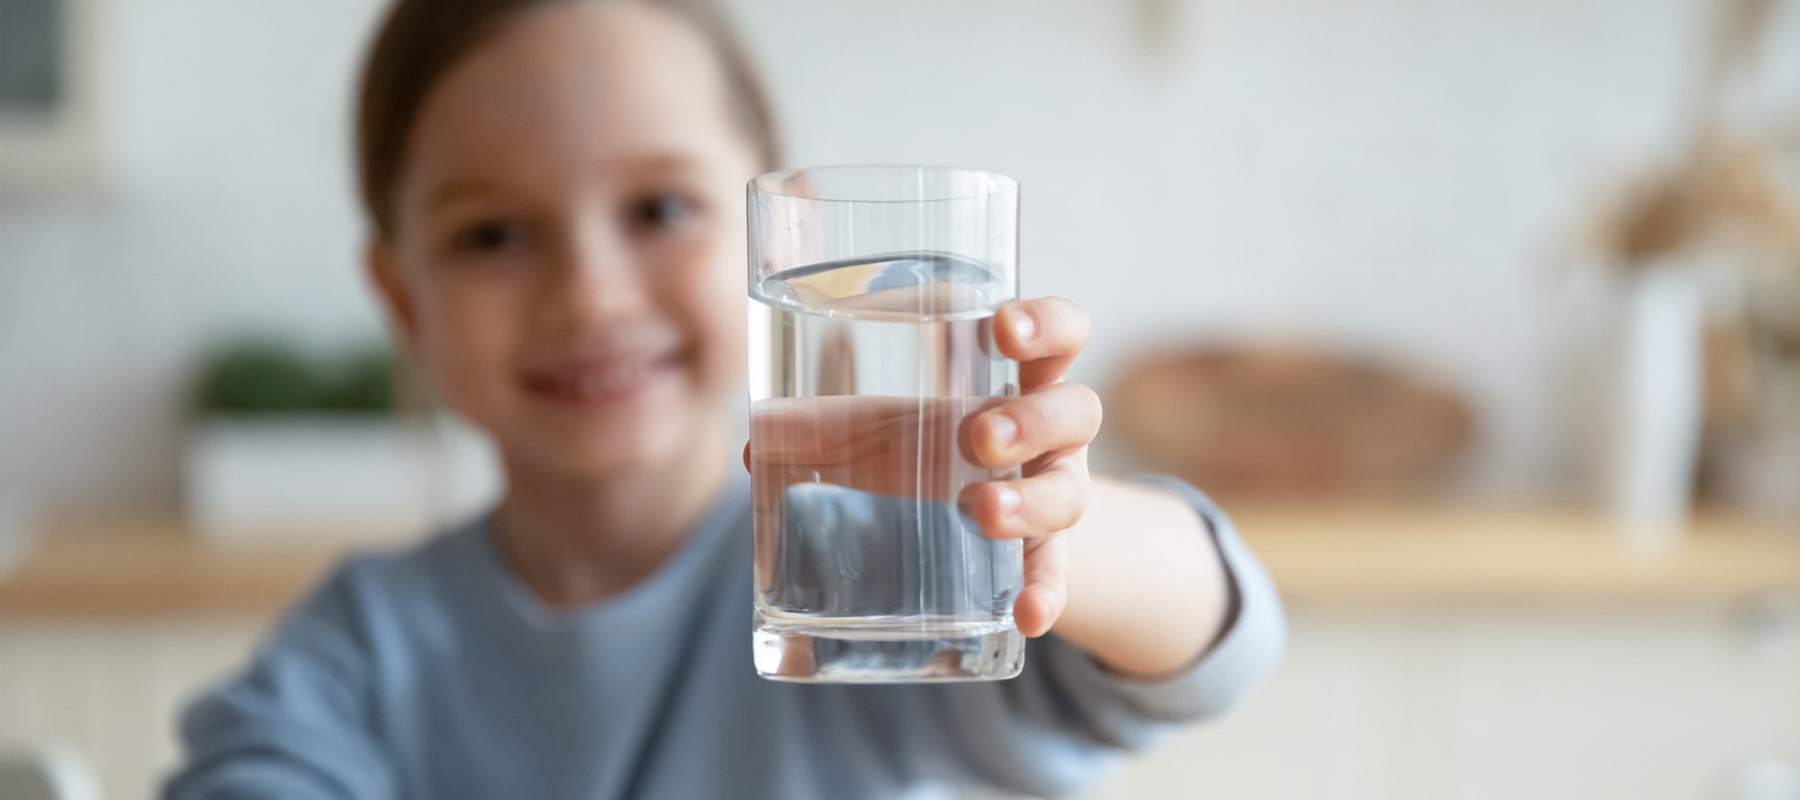 A glass of vapor distilled water in the hand of a smiling child